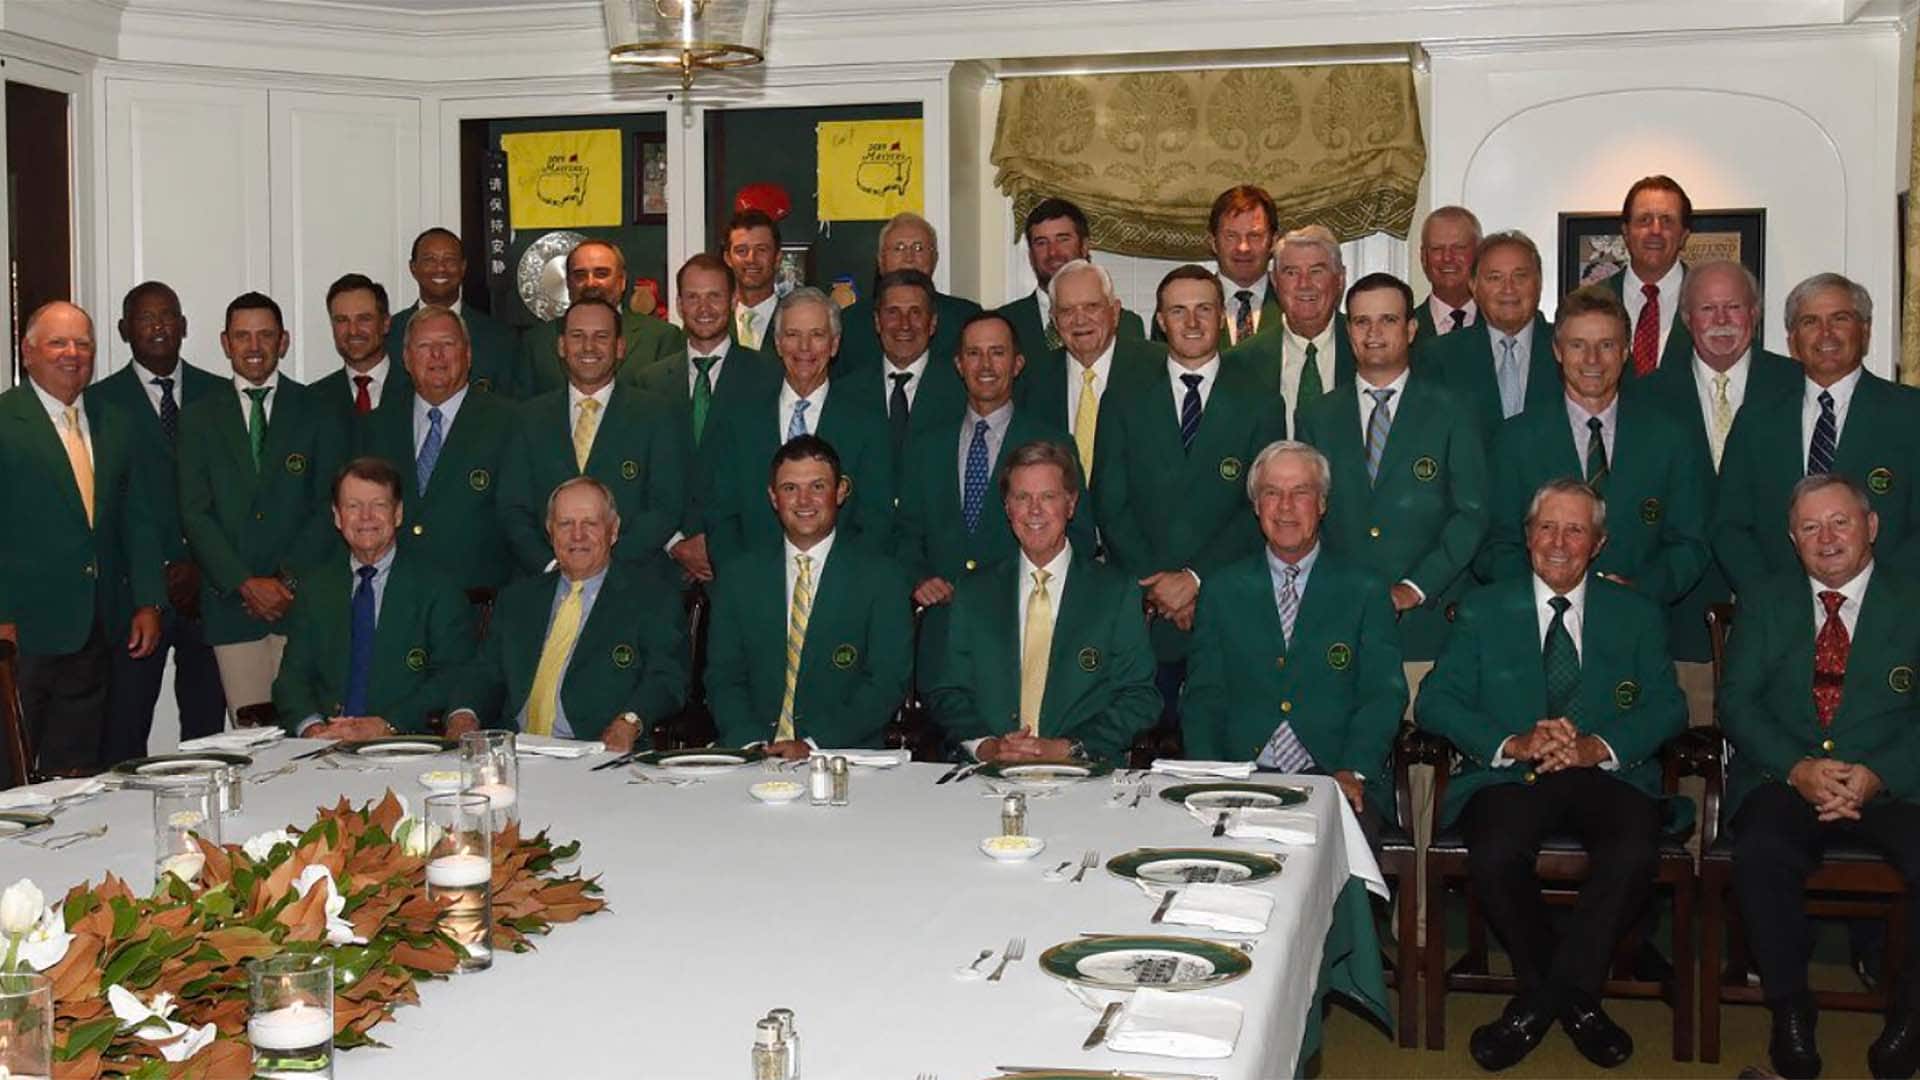 With LIV and Tour players attending, Tiger Woods not sure what Masters Champions Dinner will be like